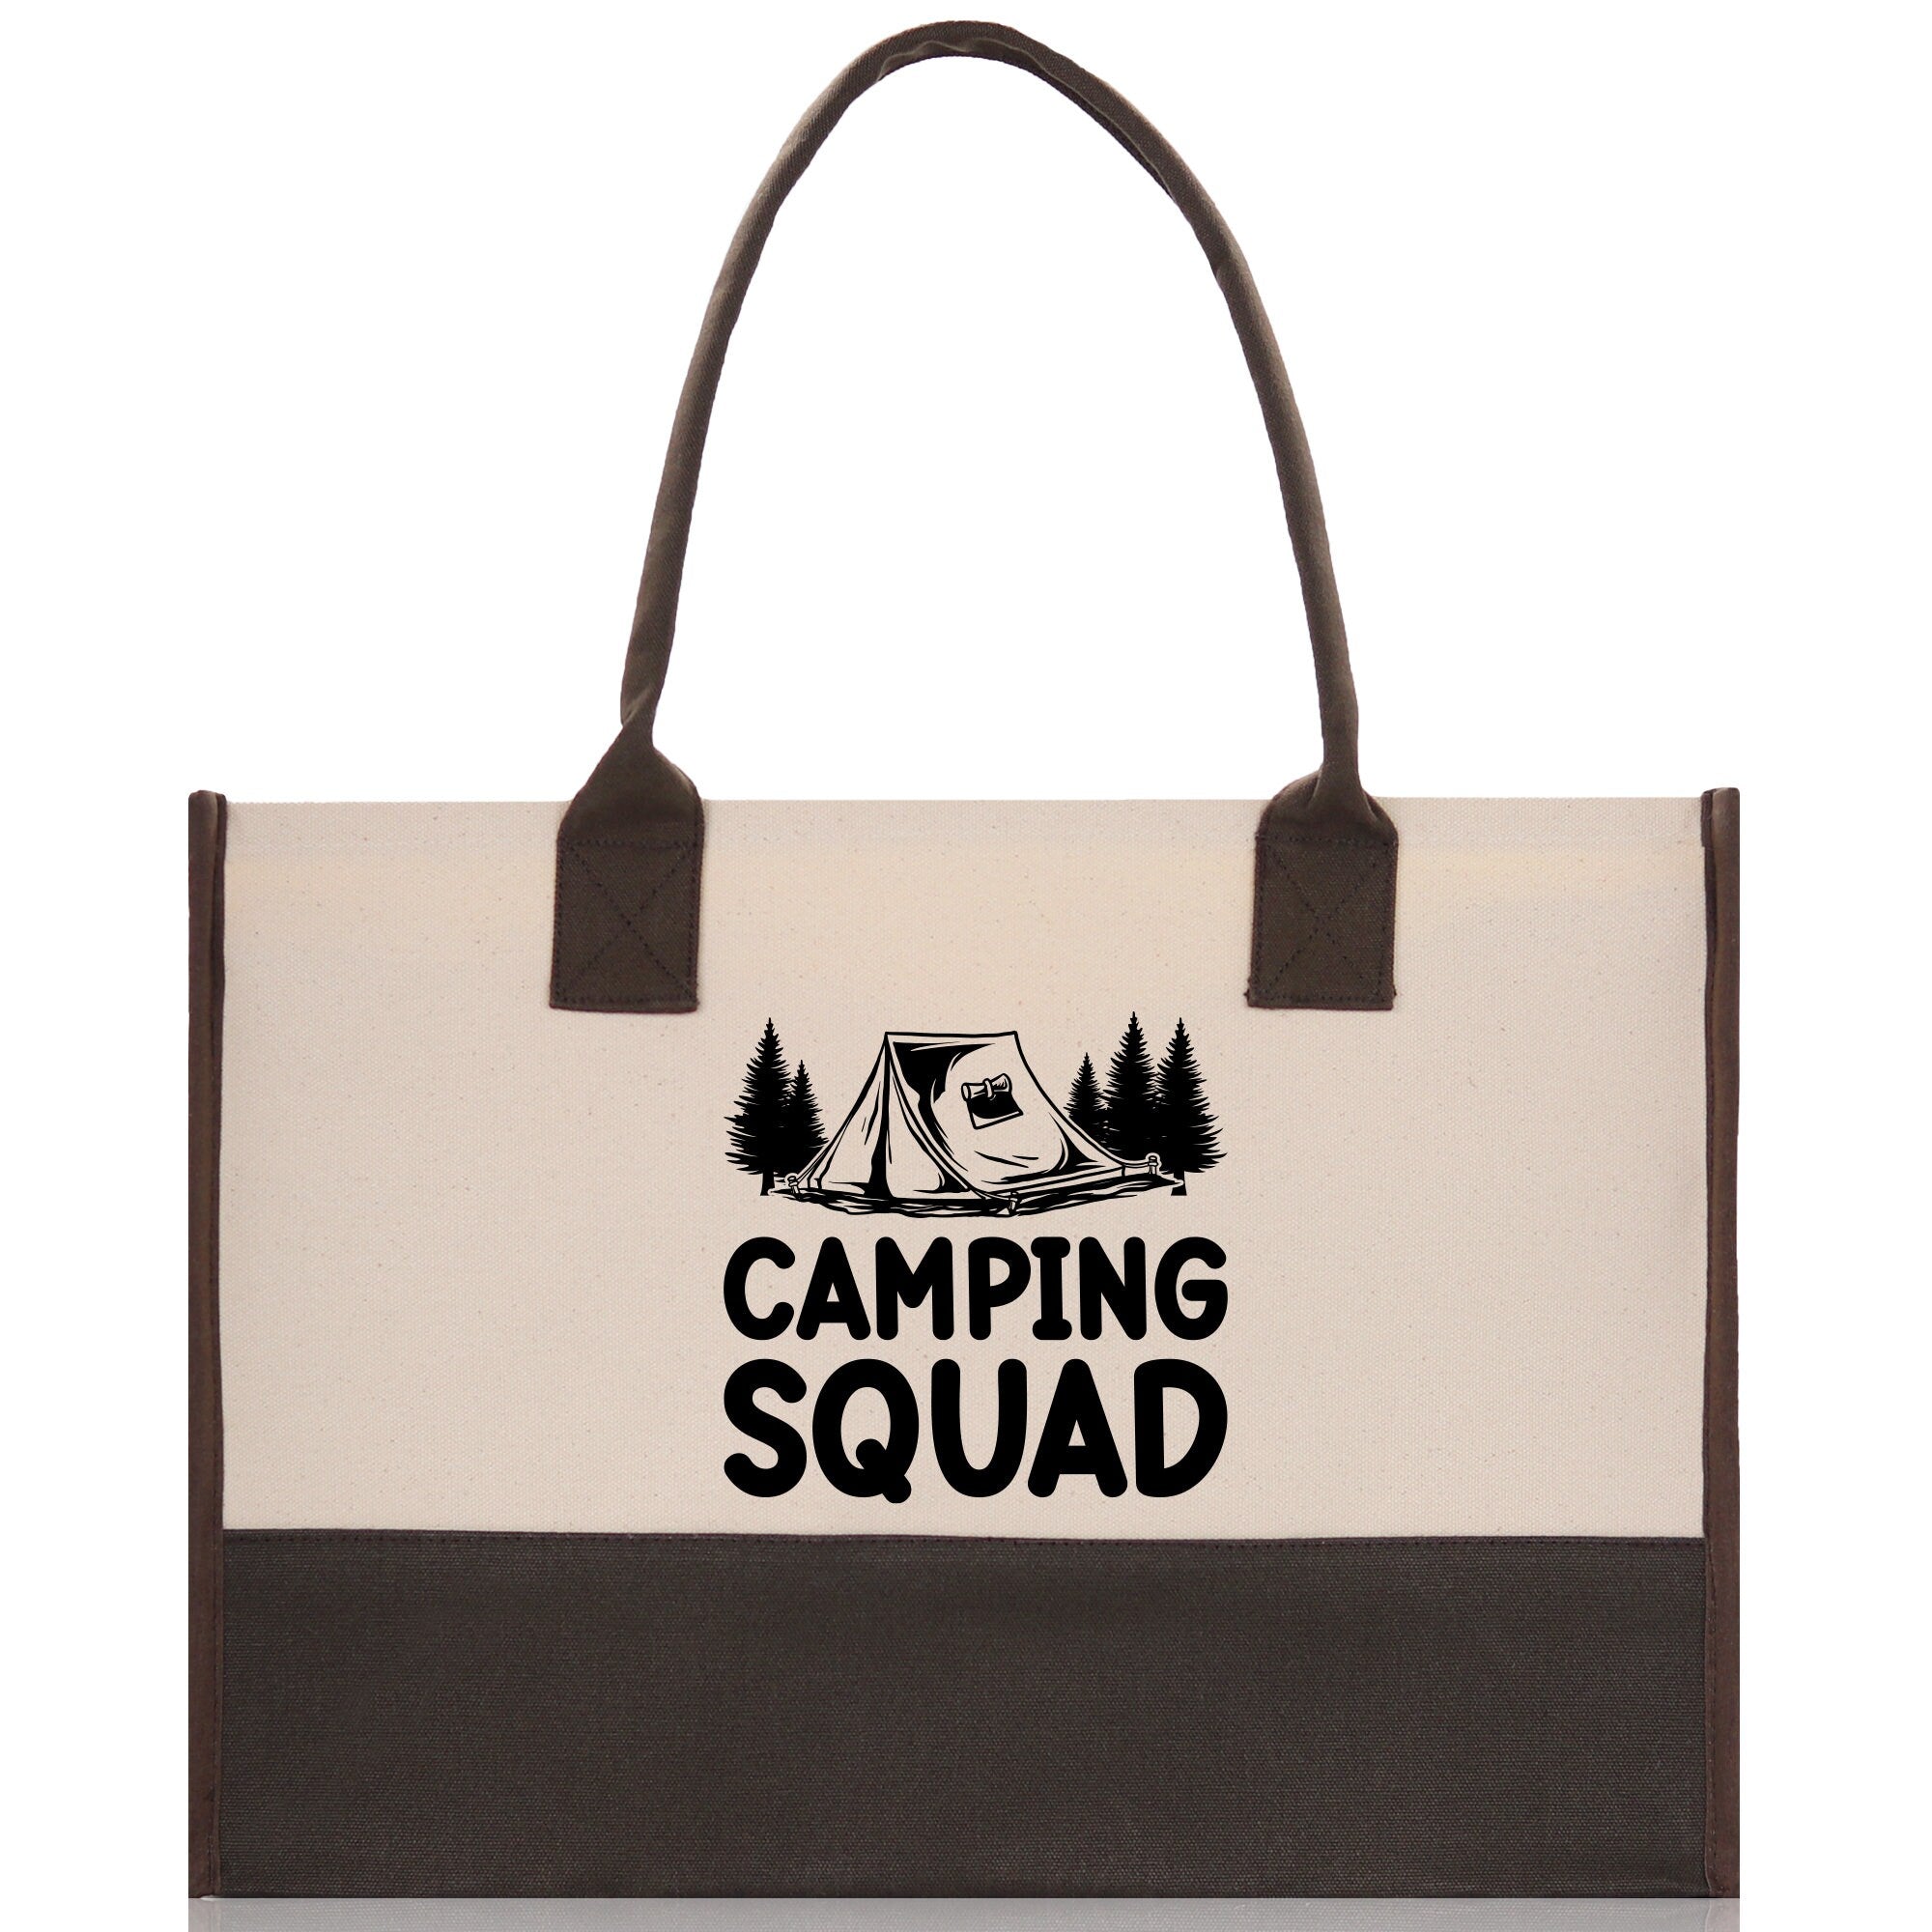 Camping Squad Cotton Canvas Chic Tote Bag Camping Tote Camping Lover Gift Tote Bag Outdoor Tote Weekender Tote Camper Tote Multipurpose Tote